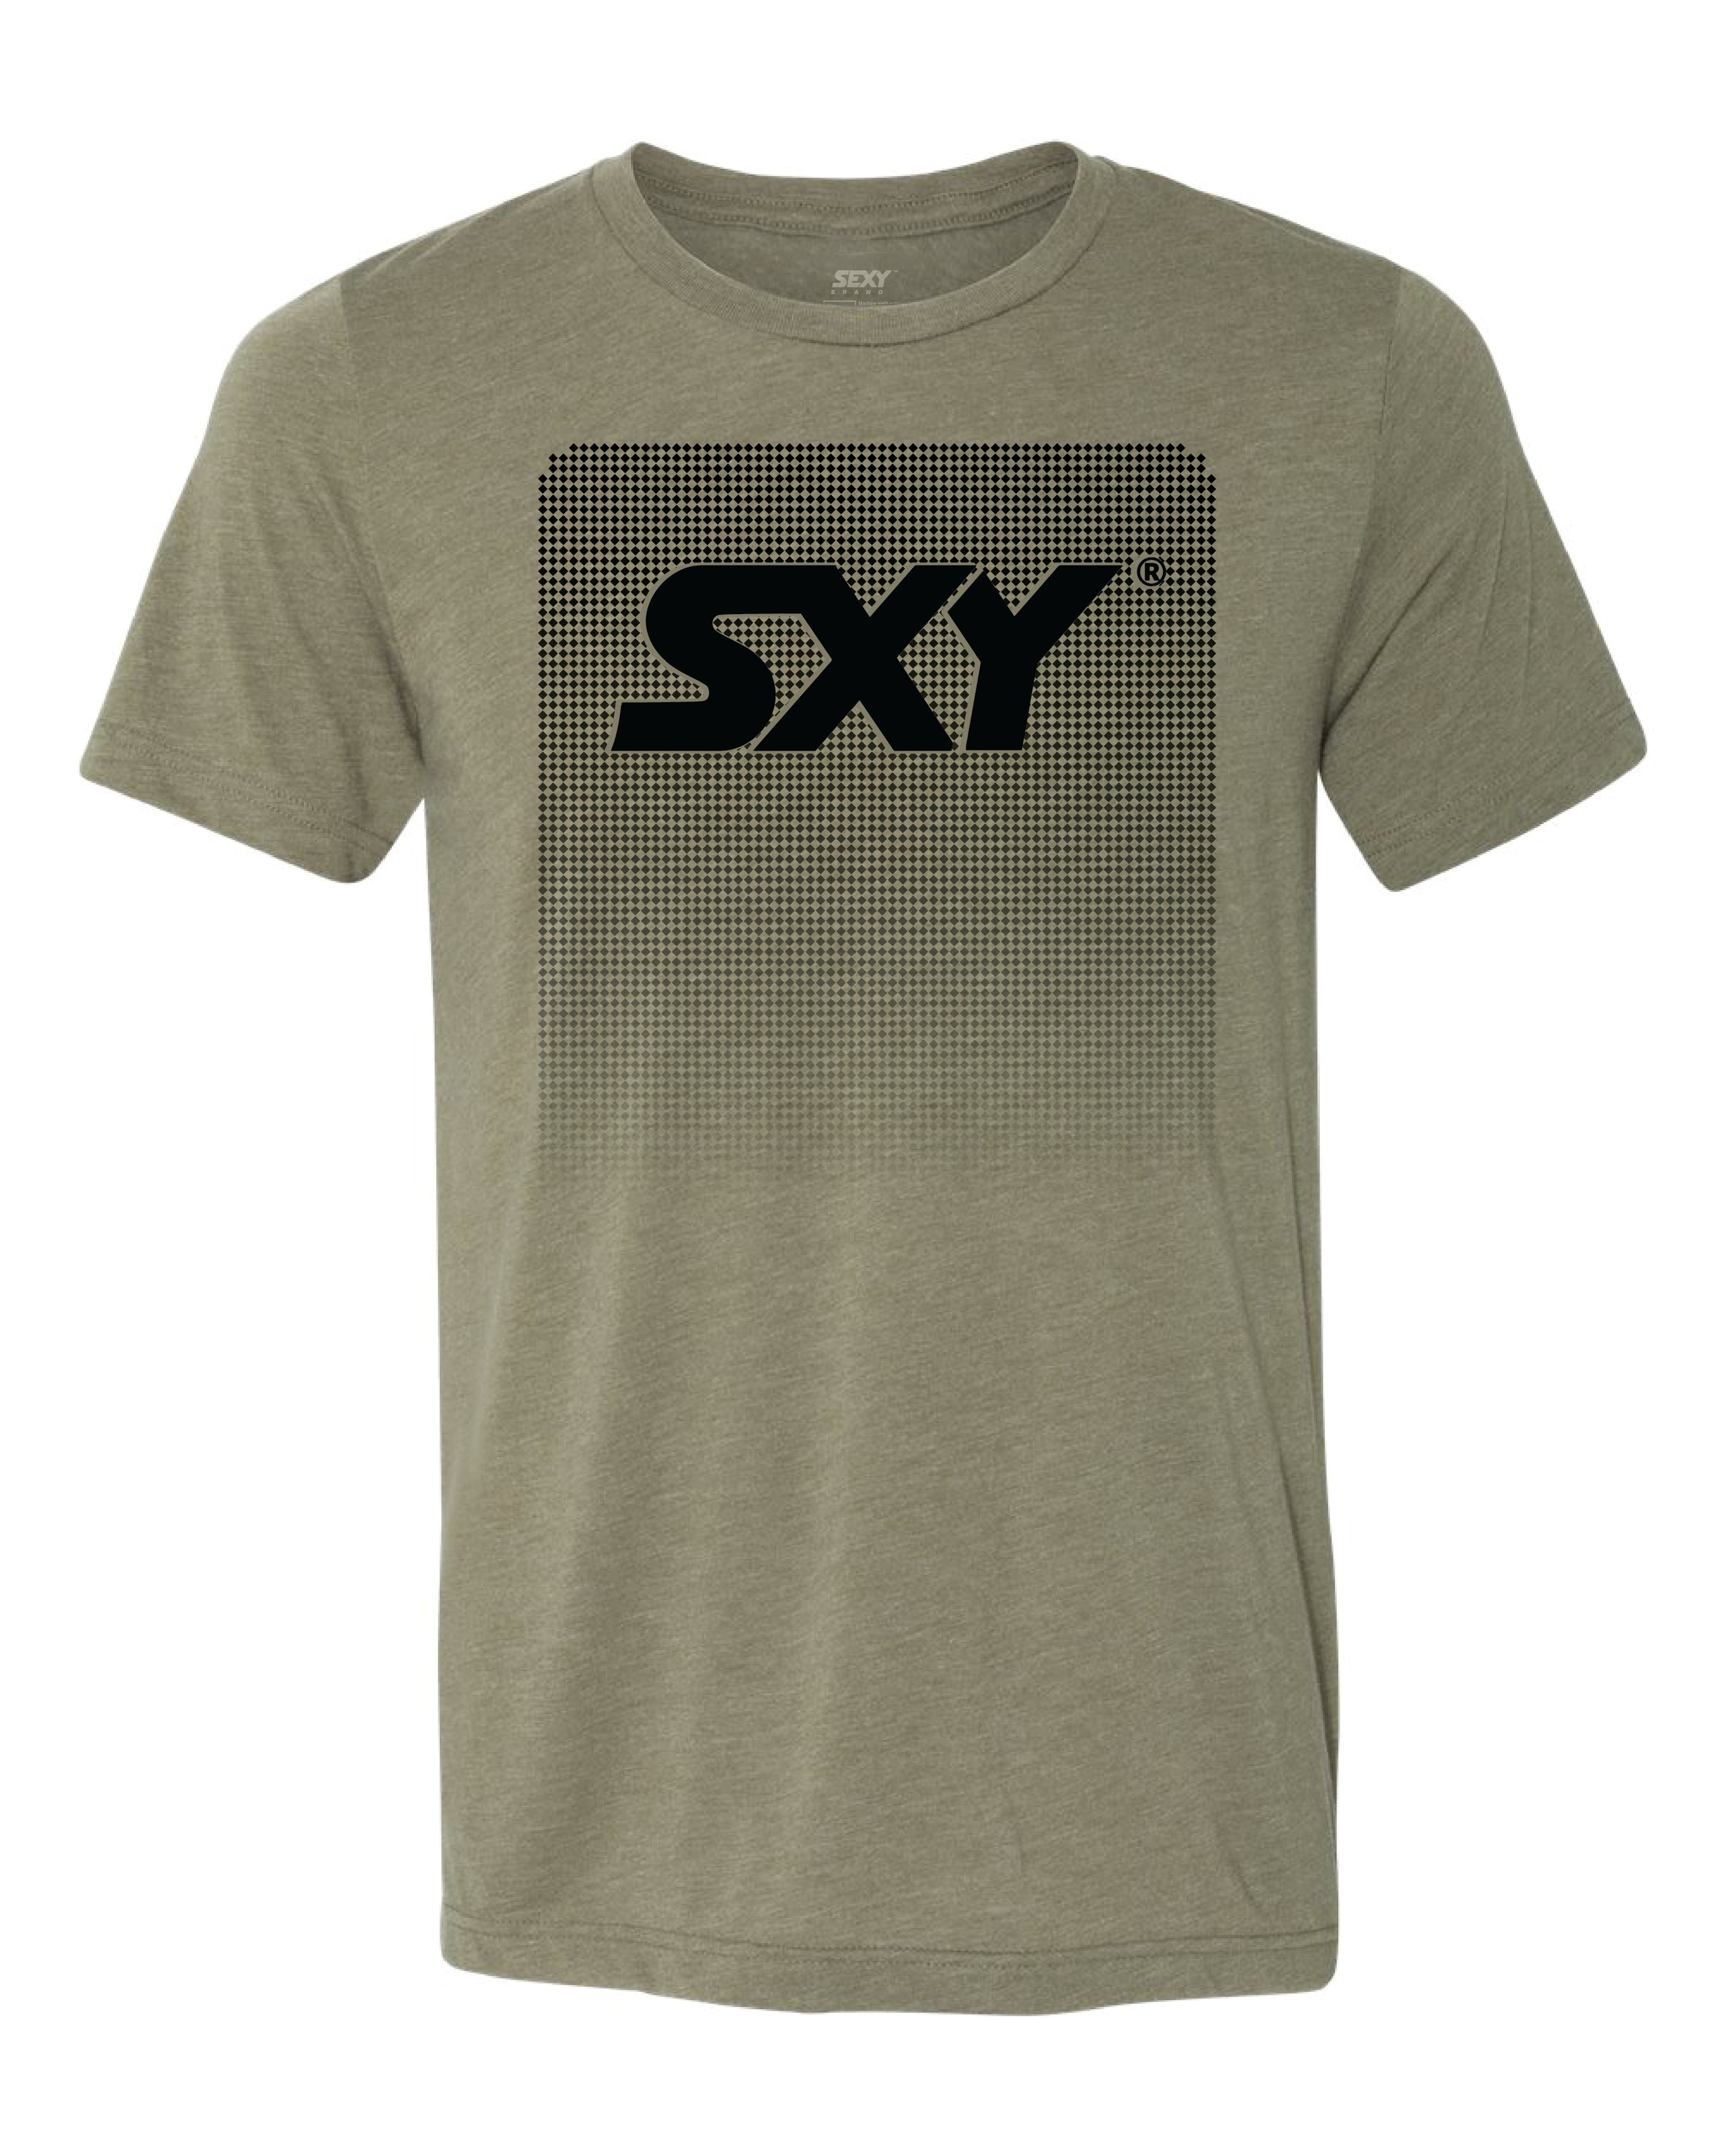 The Dominator Tee in Heathered Olive